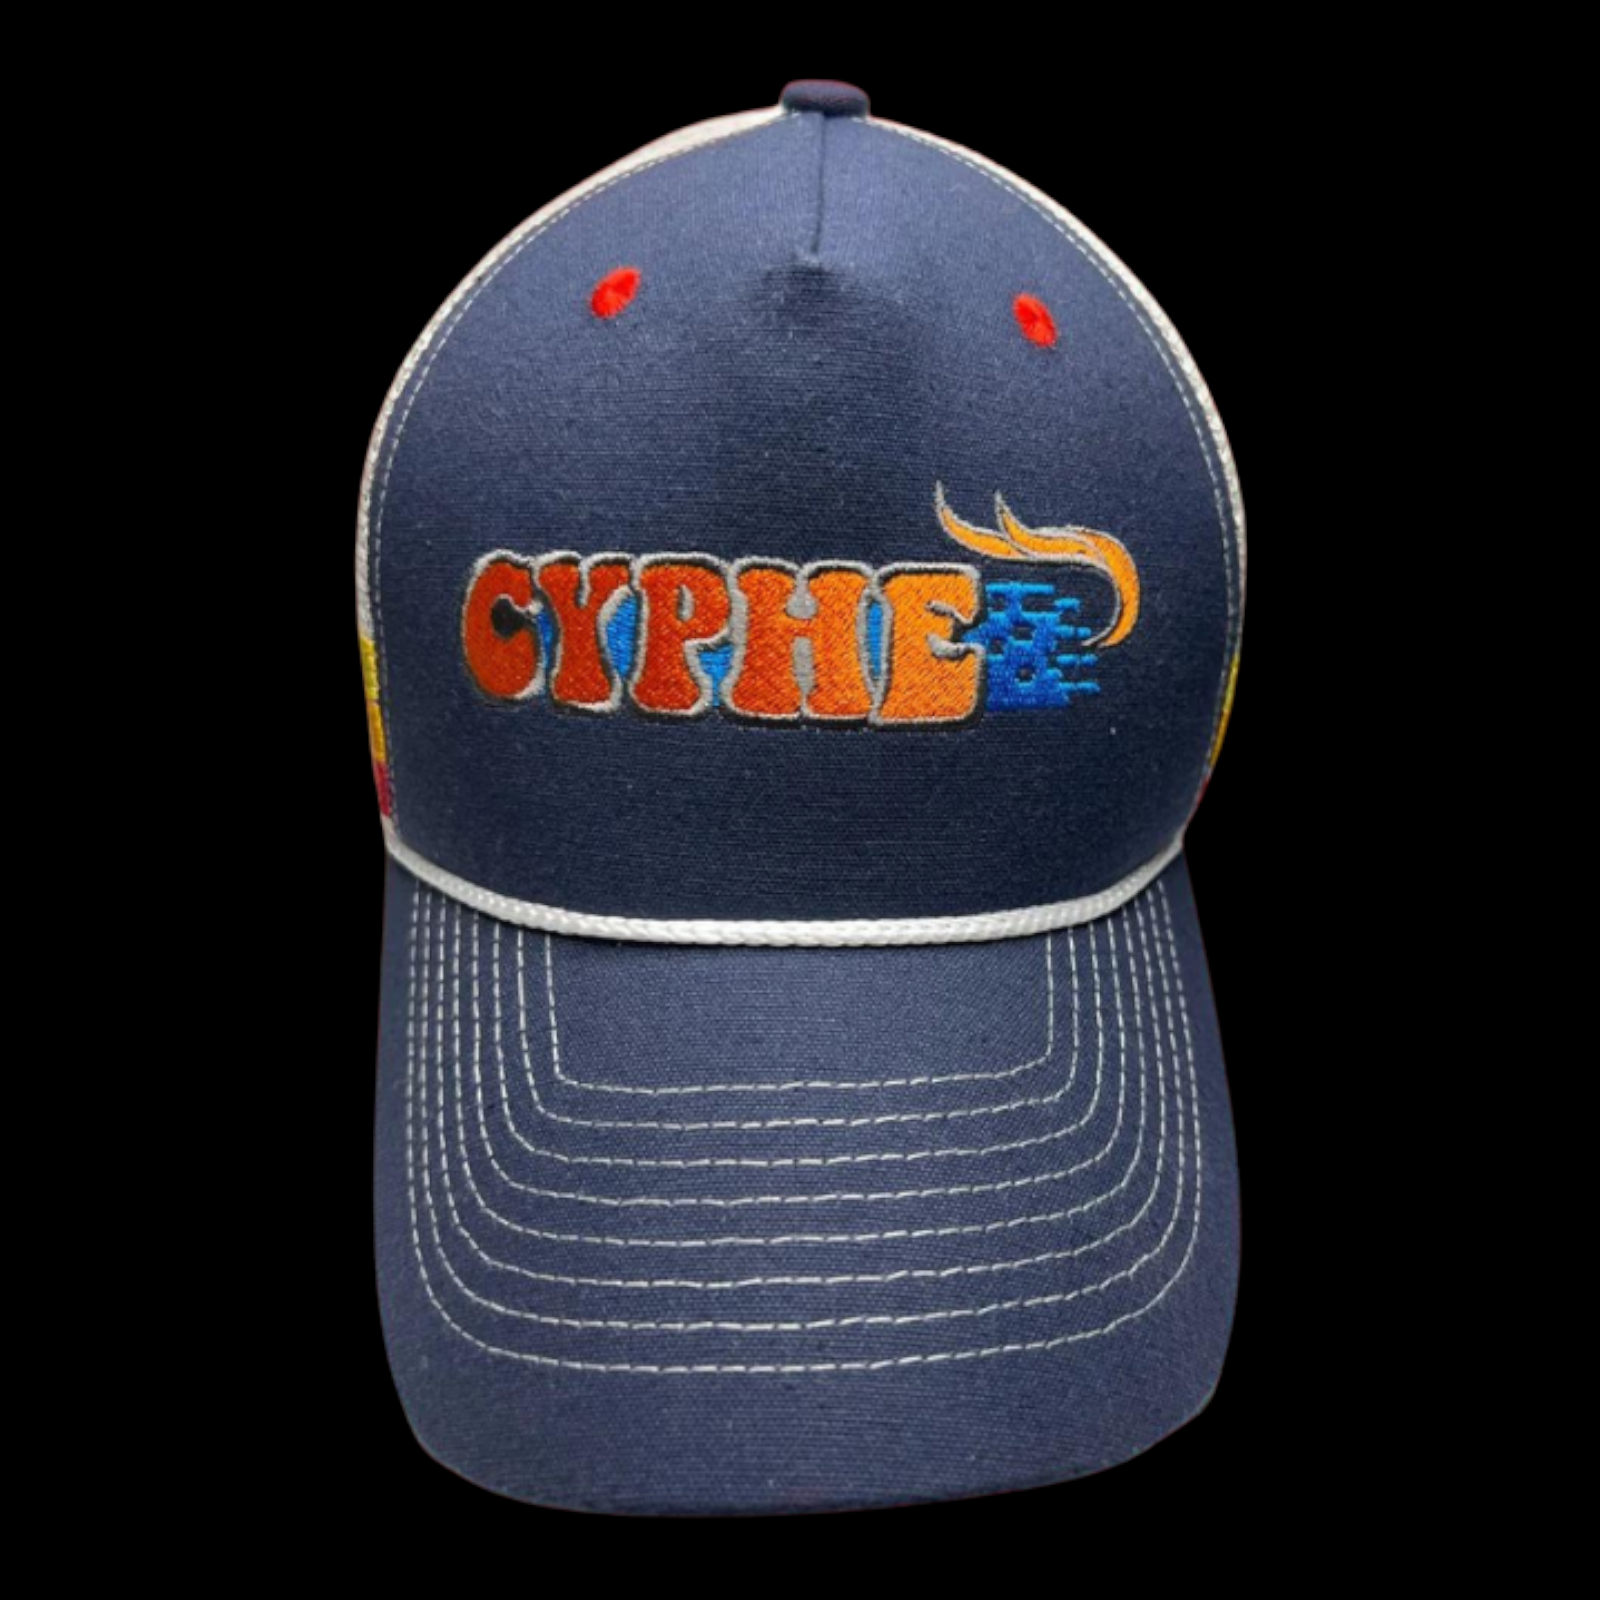 CYPHE Limited Edition Trucker Hat